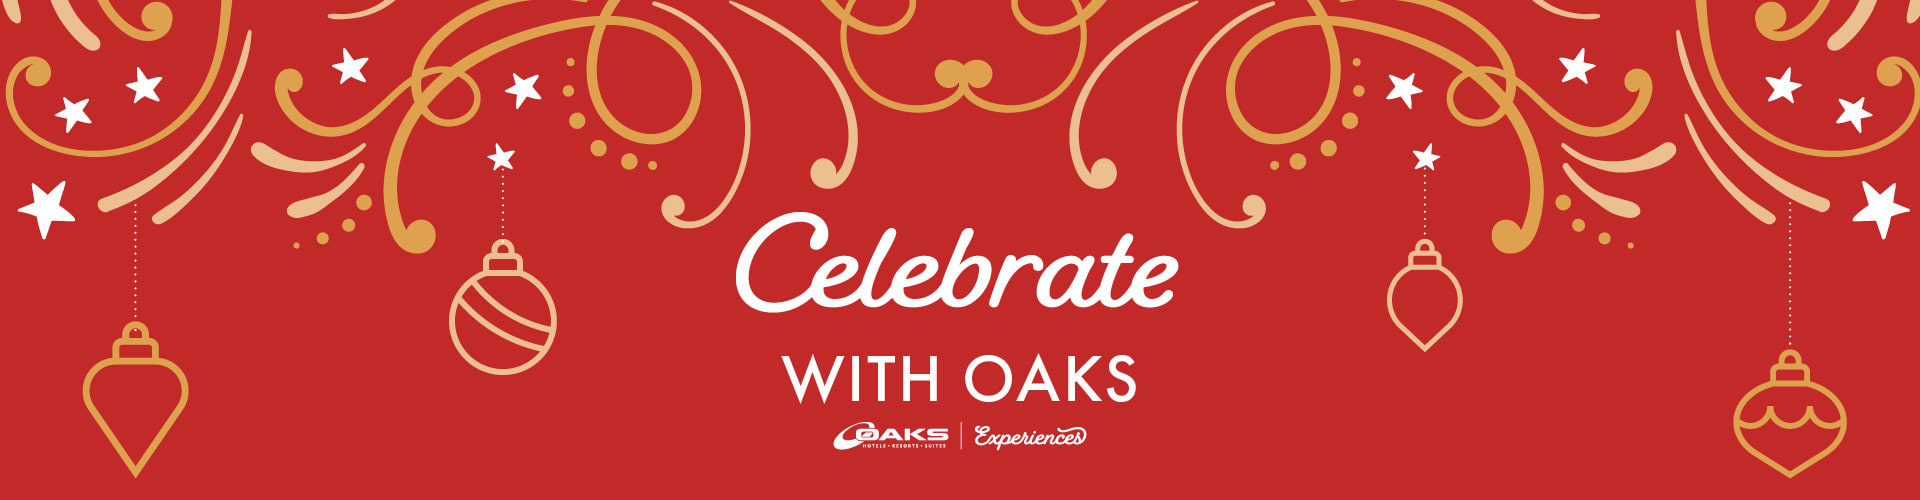 Celebrate with oaks event and function package special banner